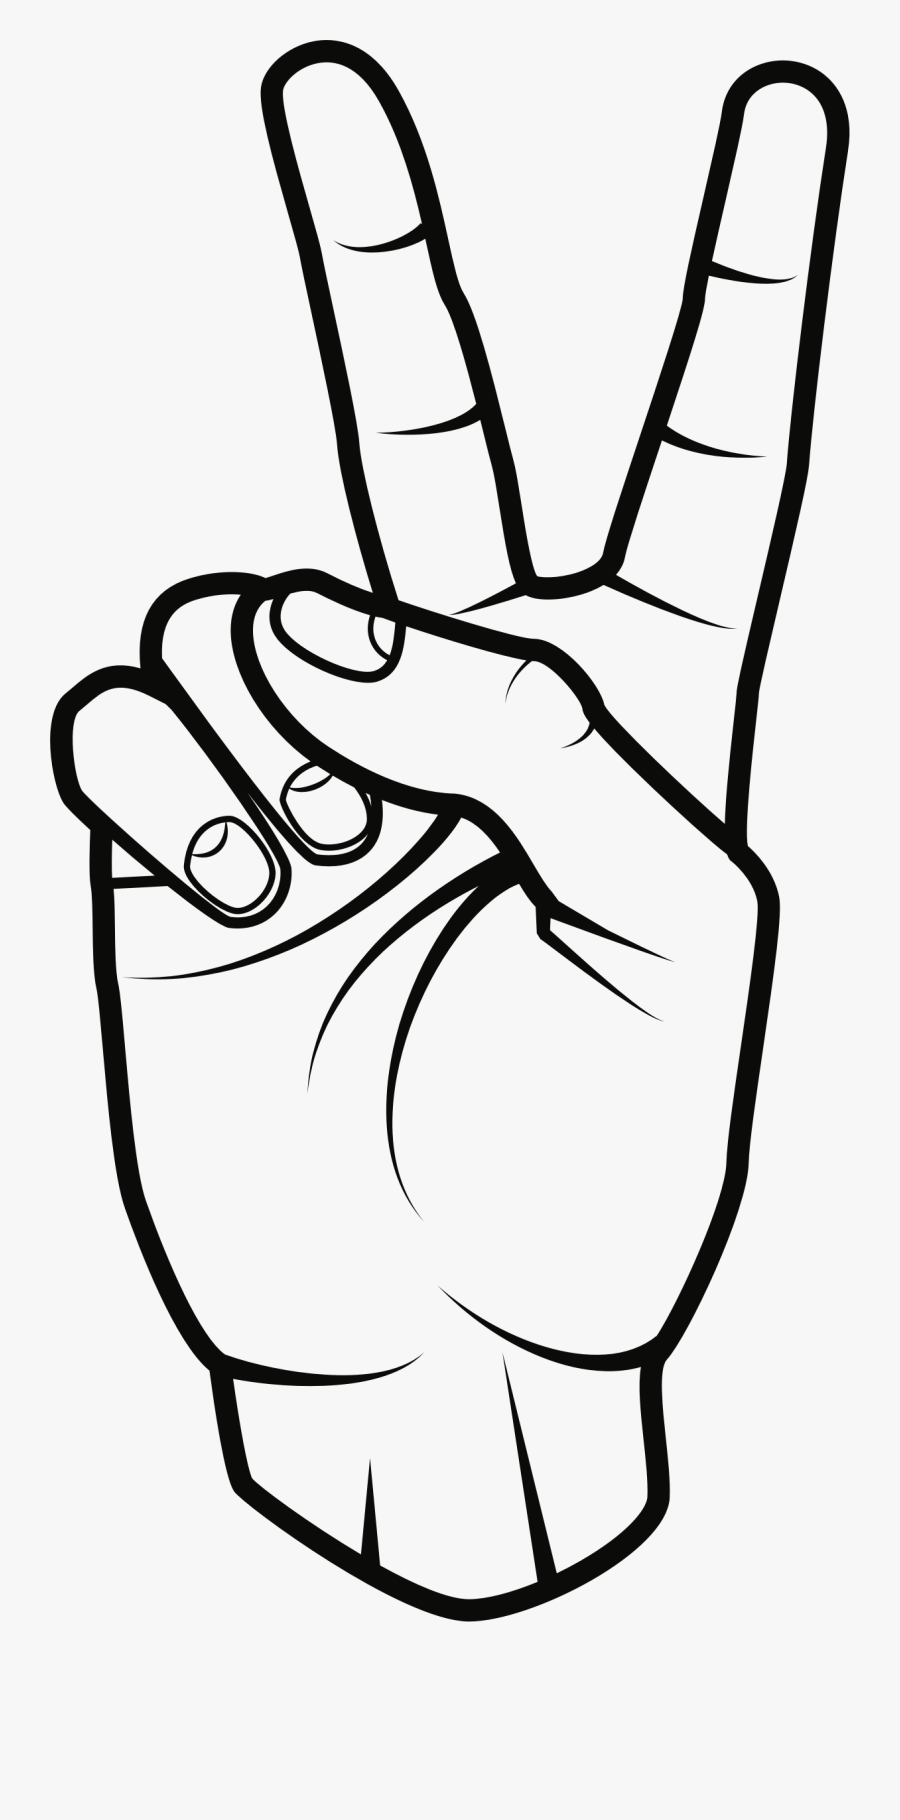 Peace Sign Hand Png - Clip Art Peace Sign Hand, Transparent Clipart